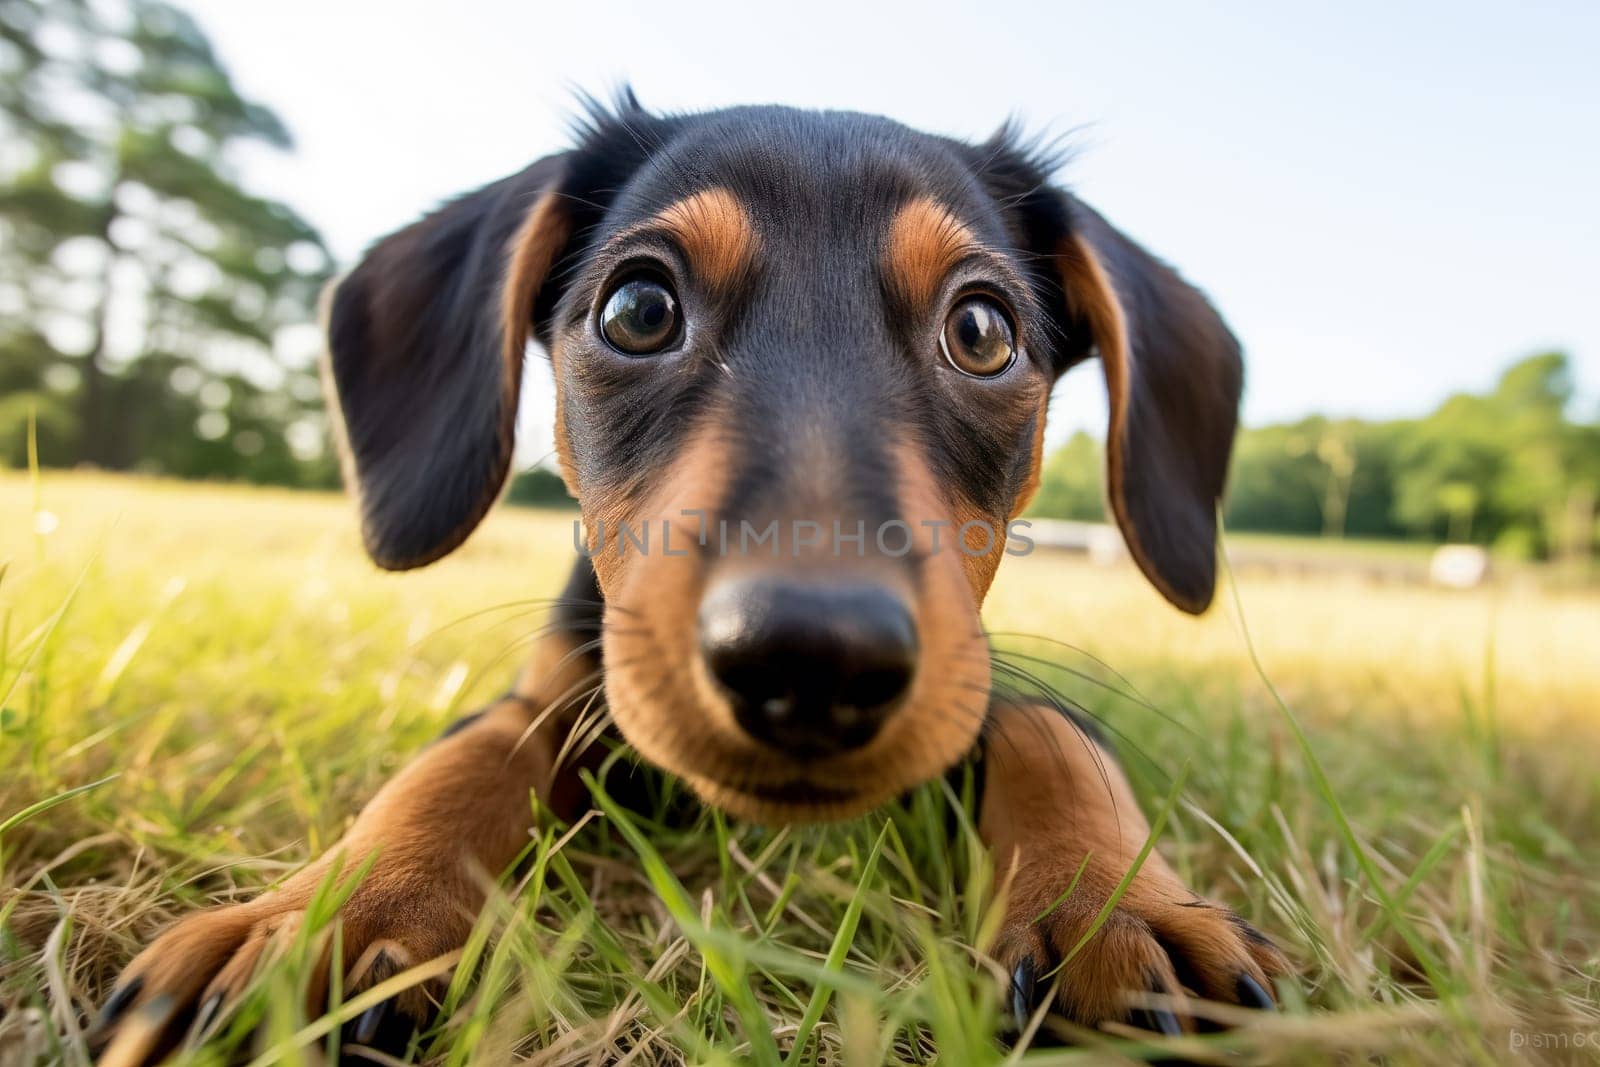 Young dachshund puppy lying in a sunlit field, surrounded by nature